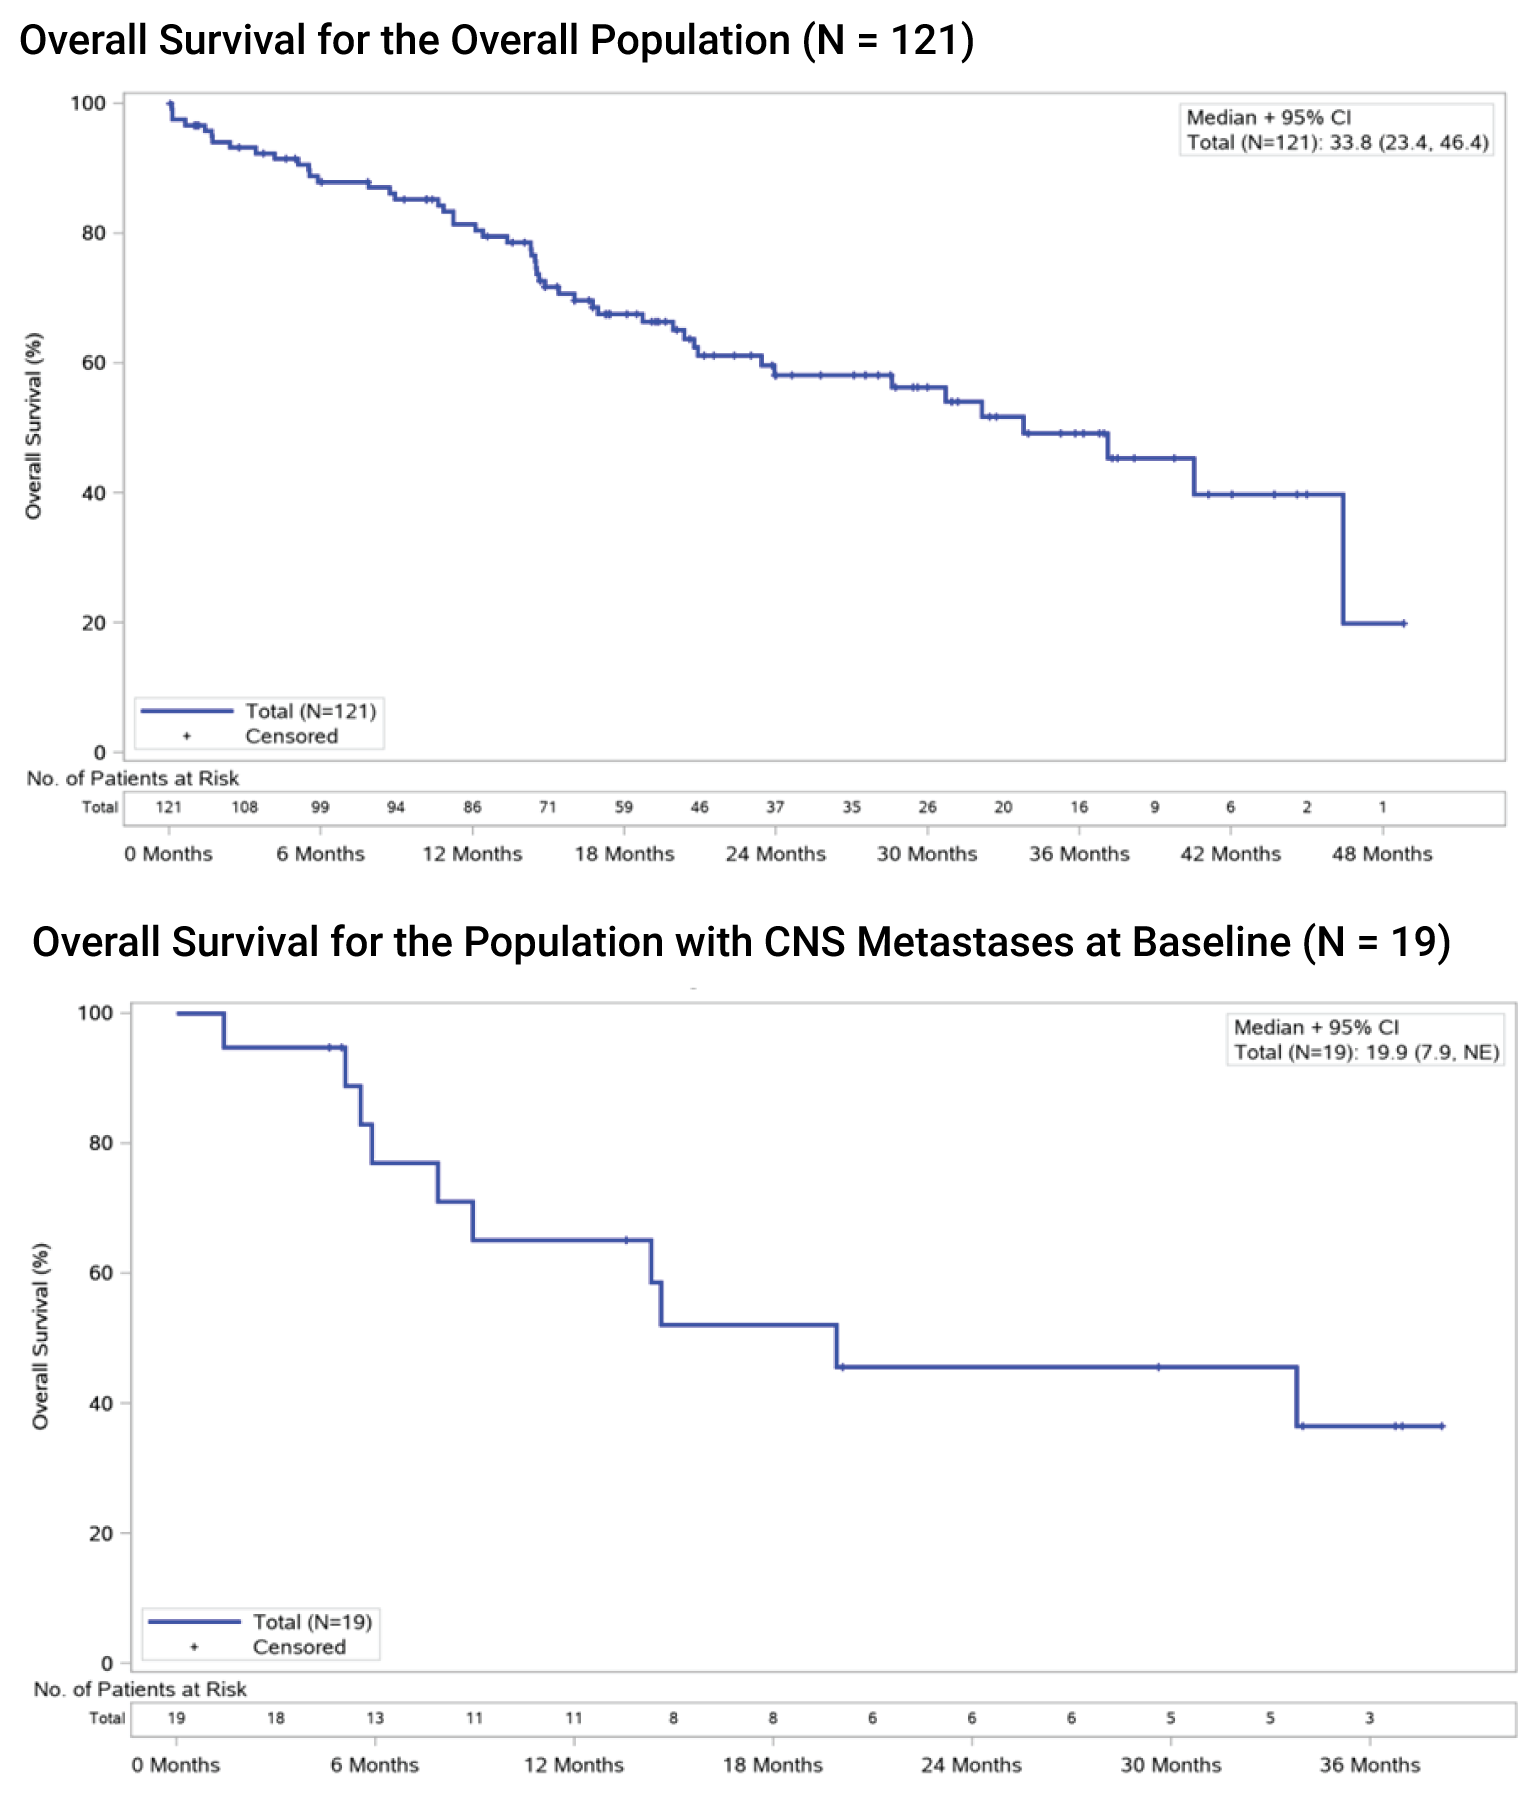 This Kaplan–Meier Plots for OS for the overall population and for patients with baseline CNS metastases.